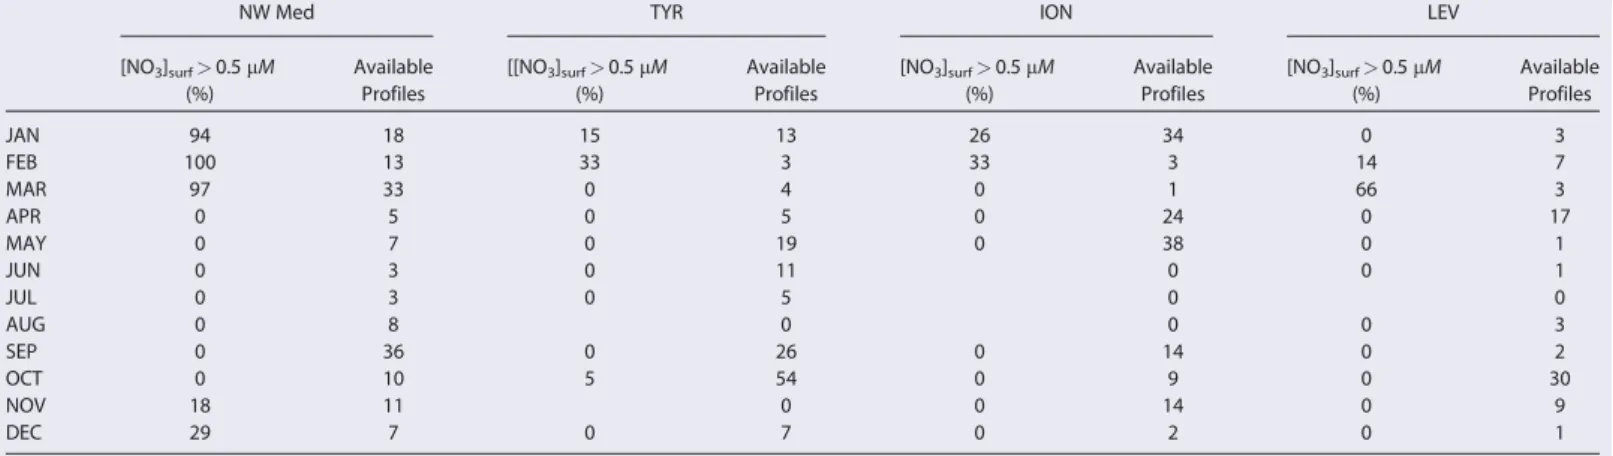 Table 3. Number of Nitrate Concentration Proﬁles in the Database for Each Zone (NW Med, TYR, ION, and LEV) and Each Month, and Proportion of Proﬁles With Nonnil Nitrate Concentration in Surface